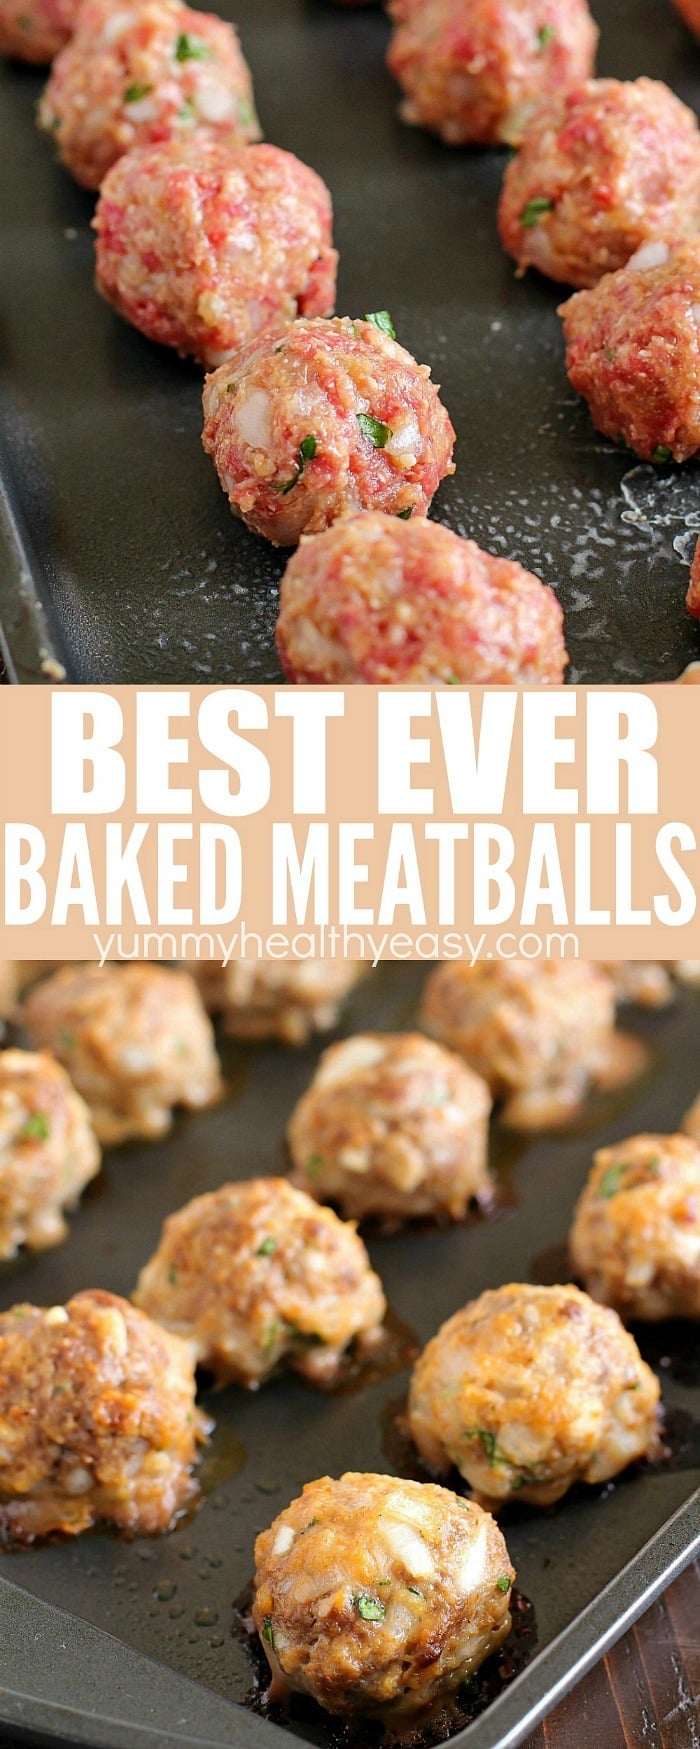 Baked Meatballs that are some of the best ever meatballs in the history of all meatballs! Such a simple and easy meatball recipe. Very tender and flavorful! Perfect to add to spaghetti sauce or any other recipe that requires basic meatballs! via @jennikolaus